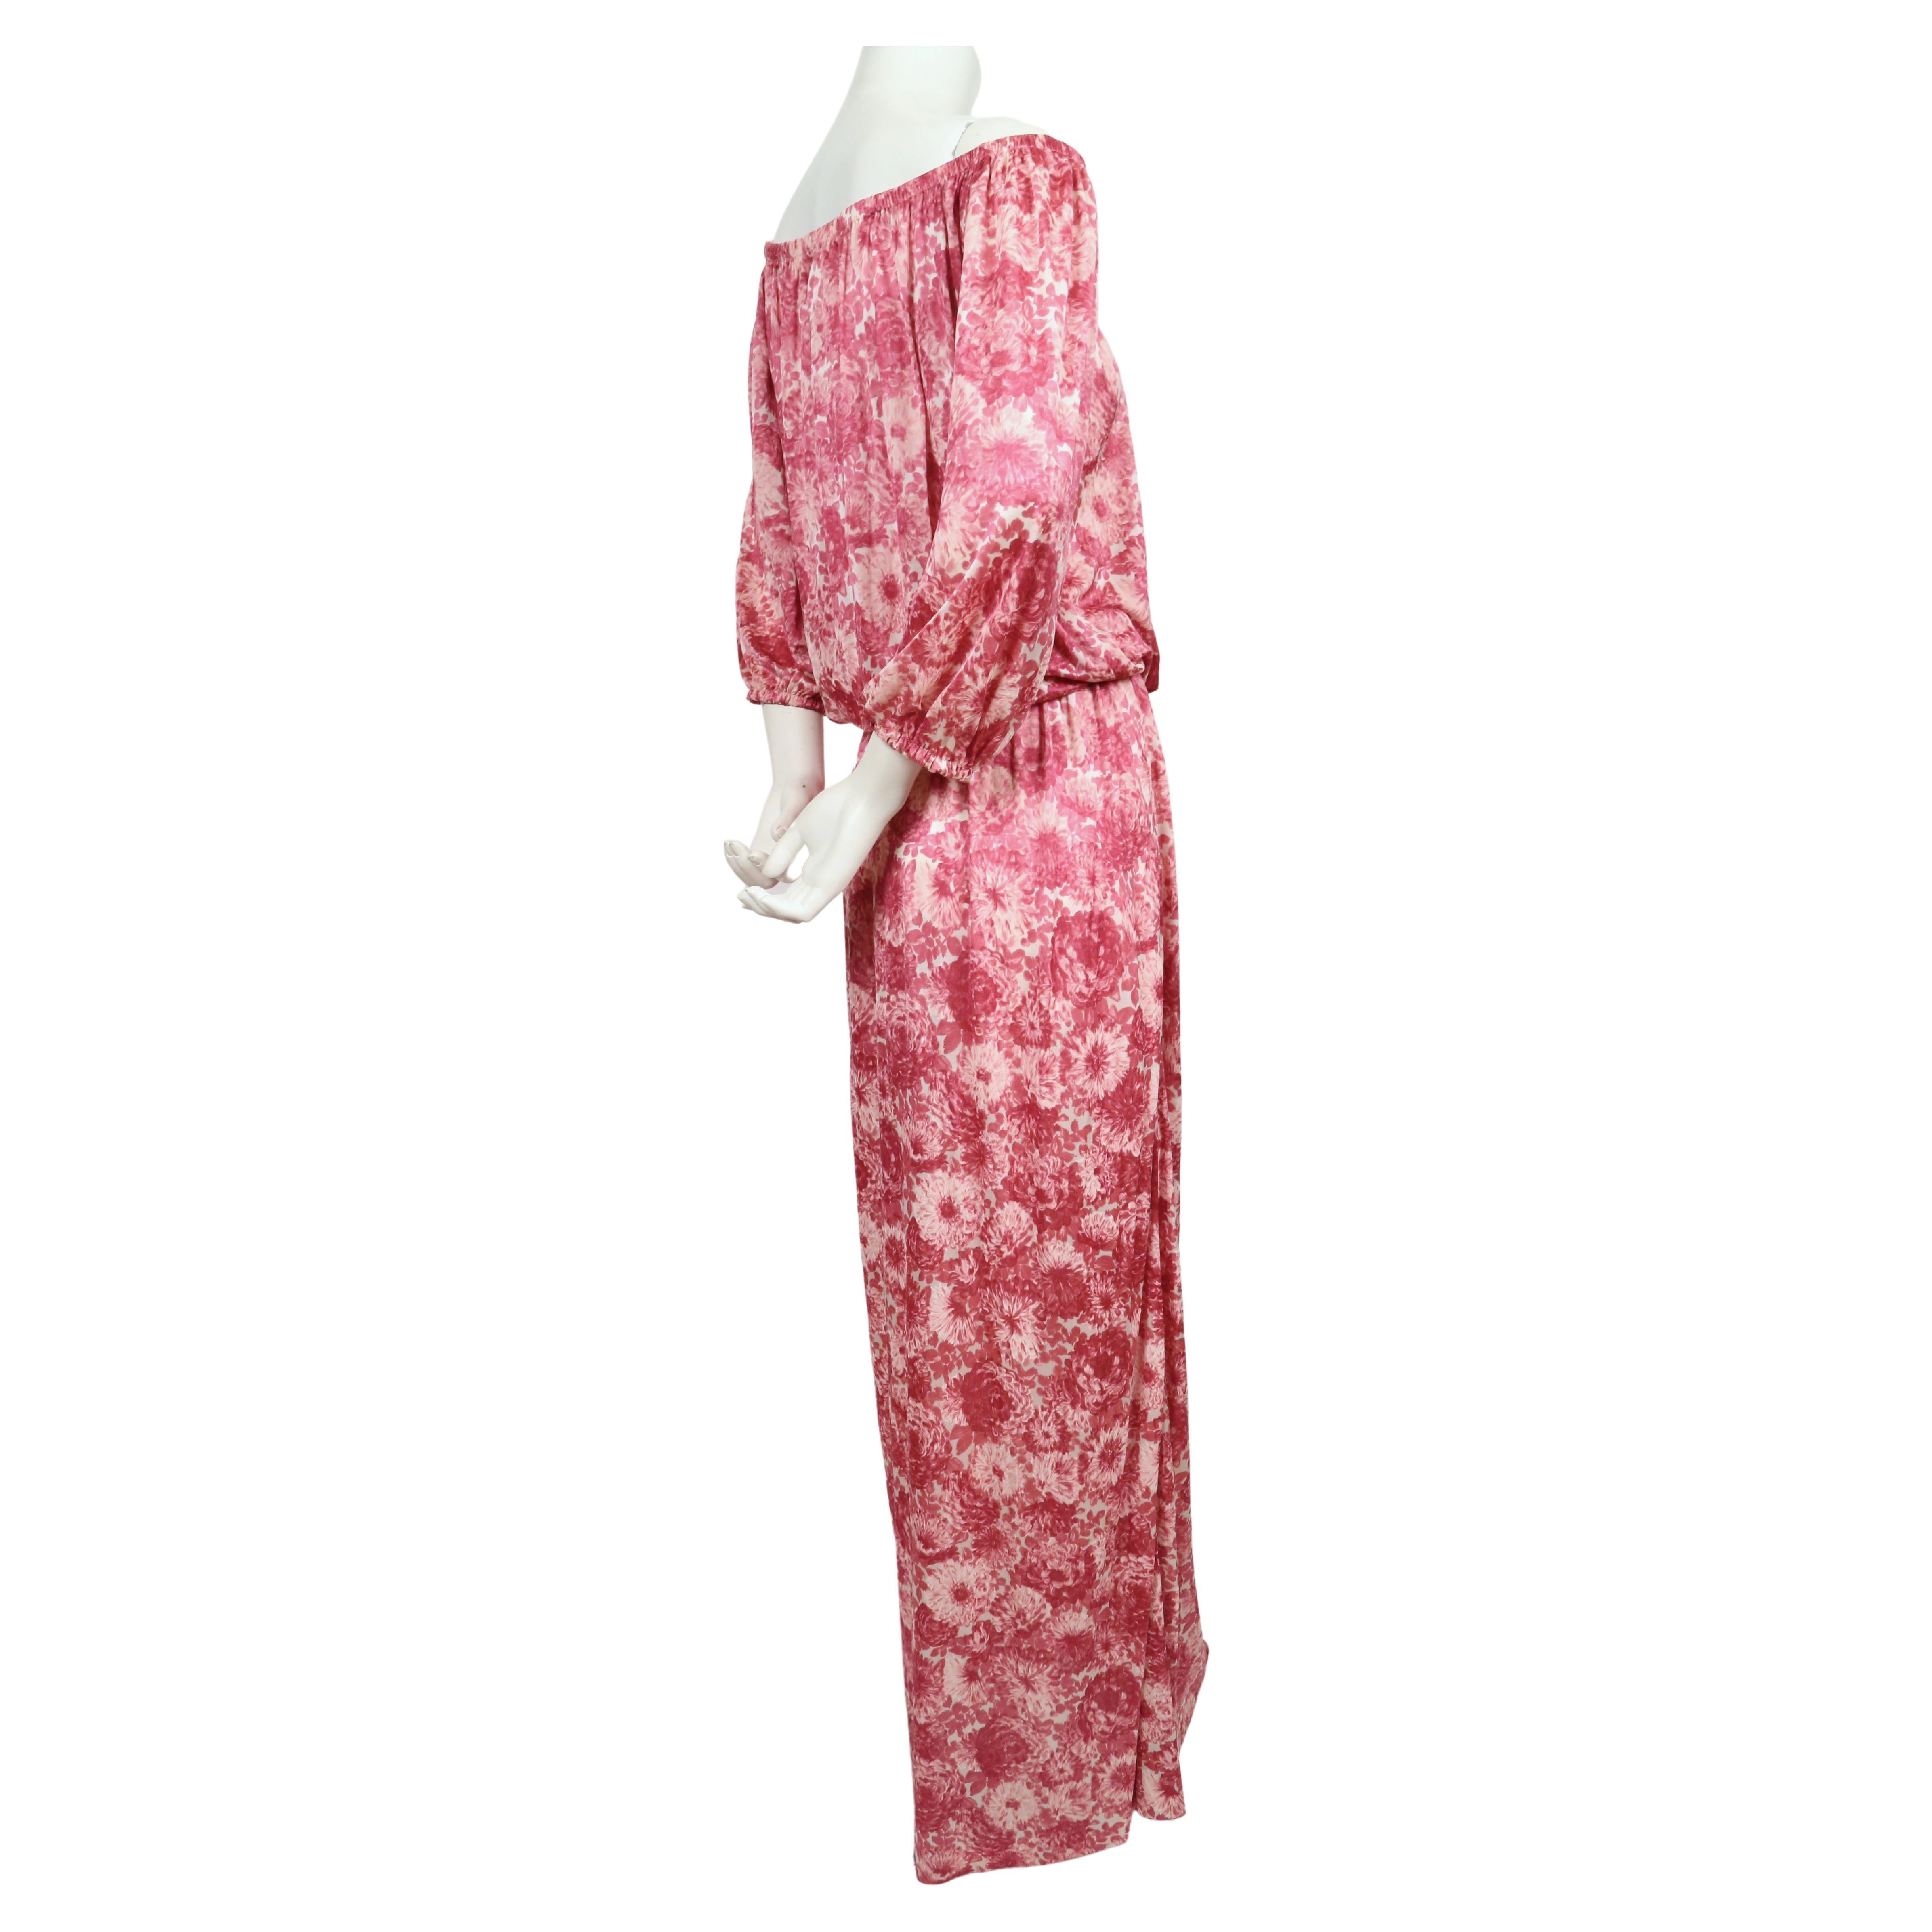 Women's or Men's 1970's YVES SAINT LAURENT floral printed silk jersey dress For Sale